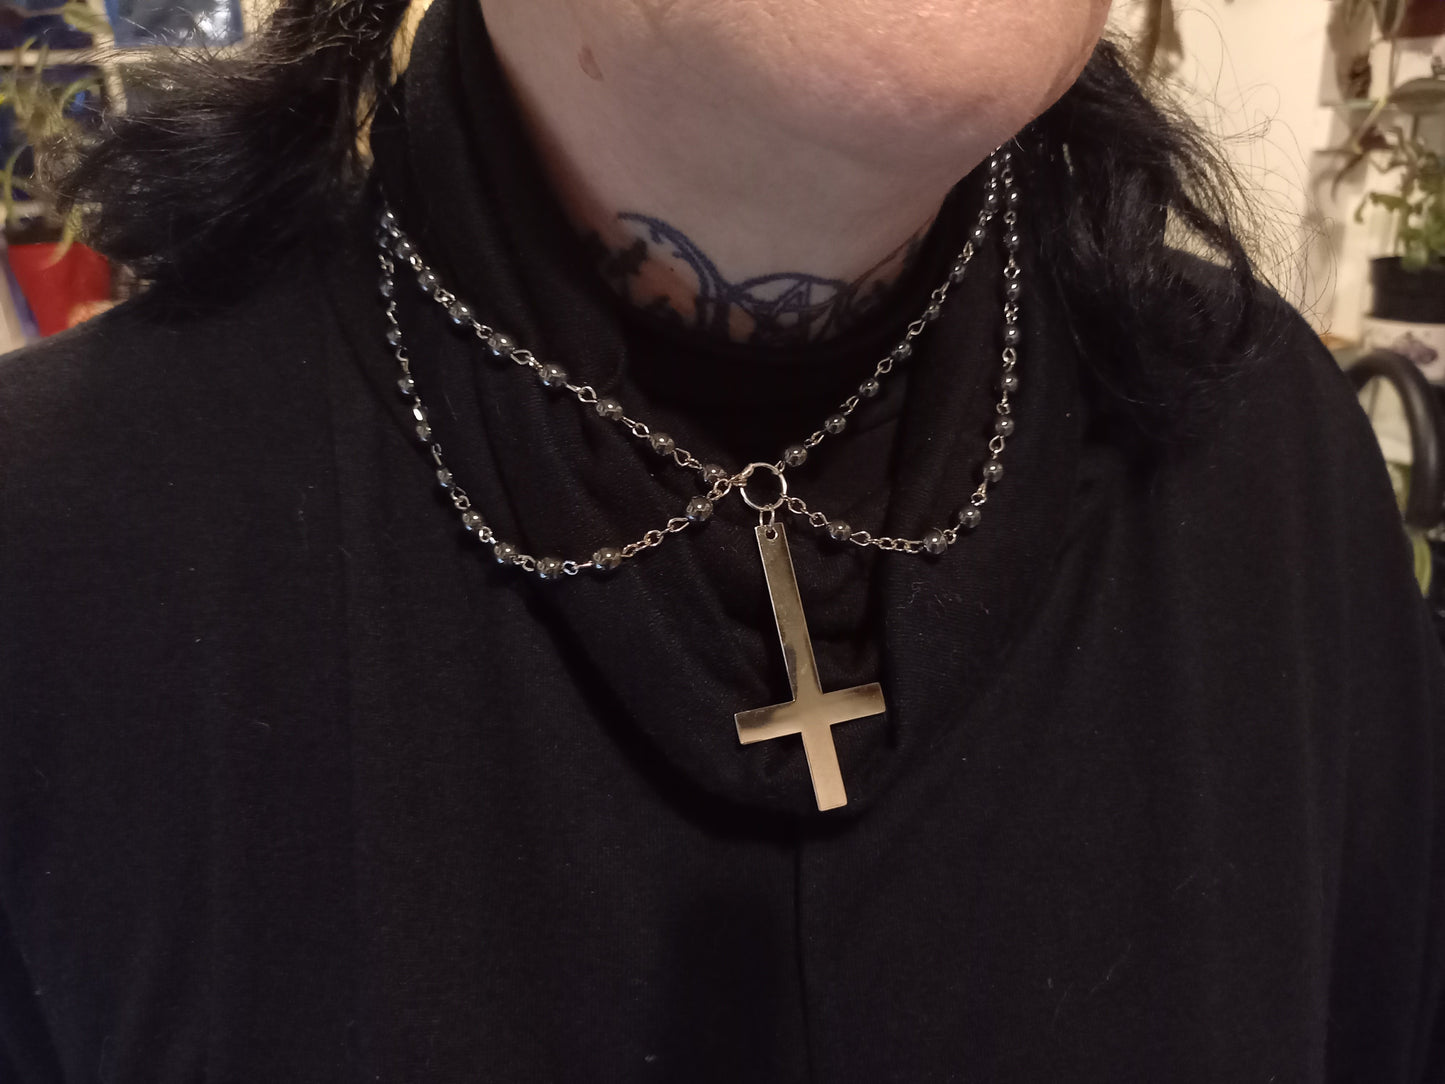 witch witchcraft Satanic Occult "Stainless steel Inverted cross with inverted pentagrams " double layer rosary